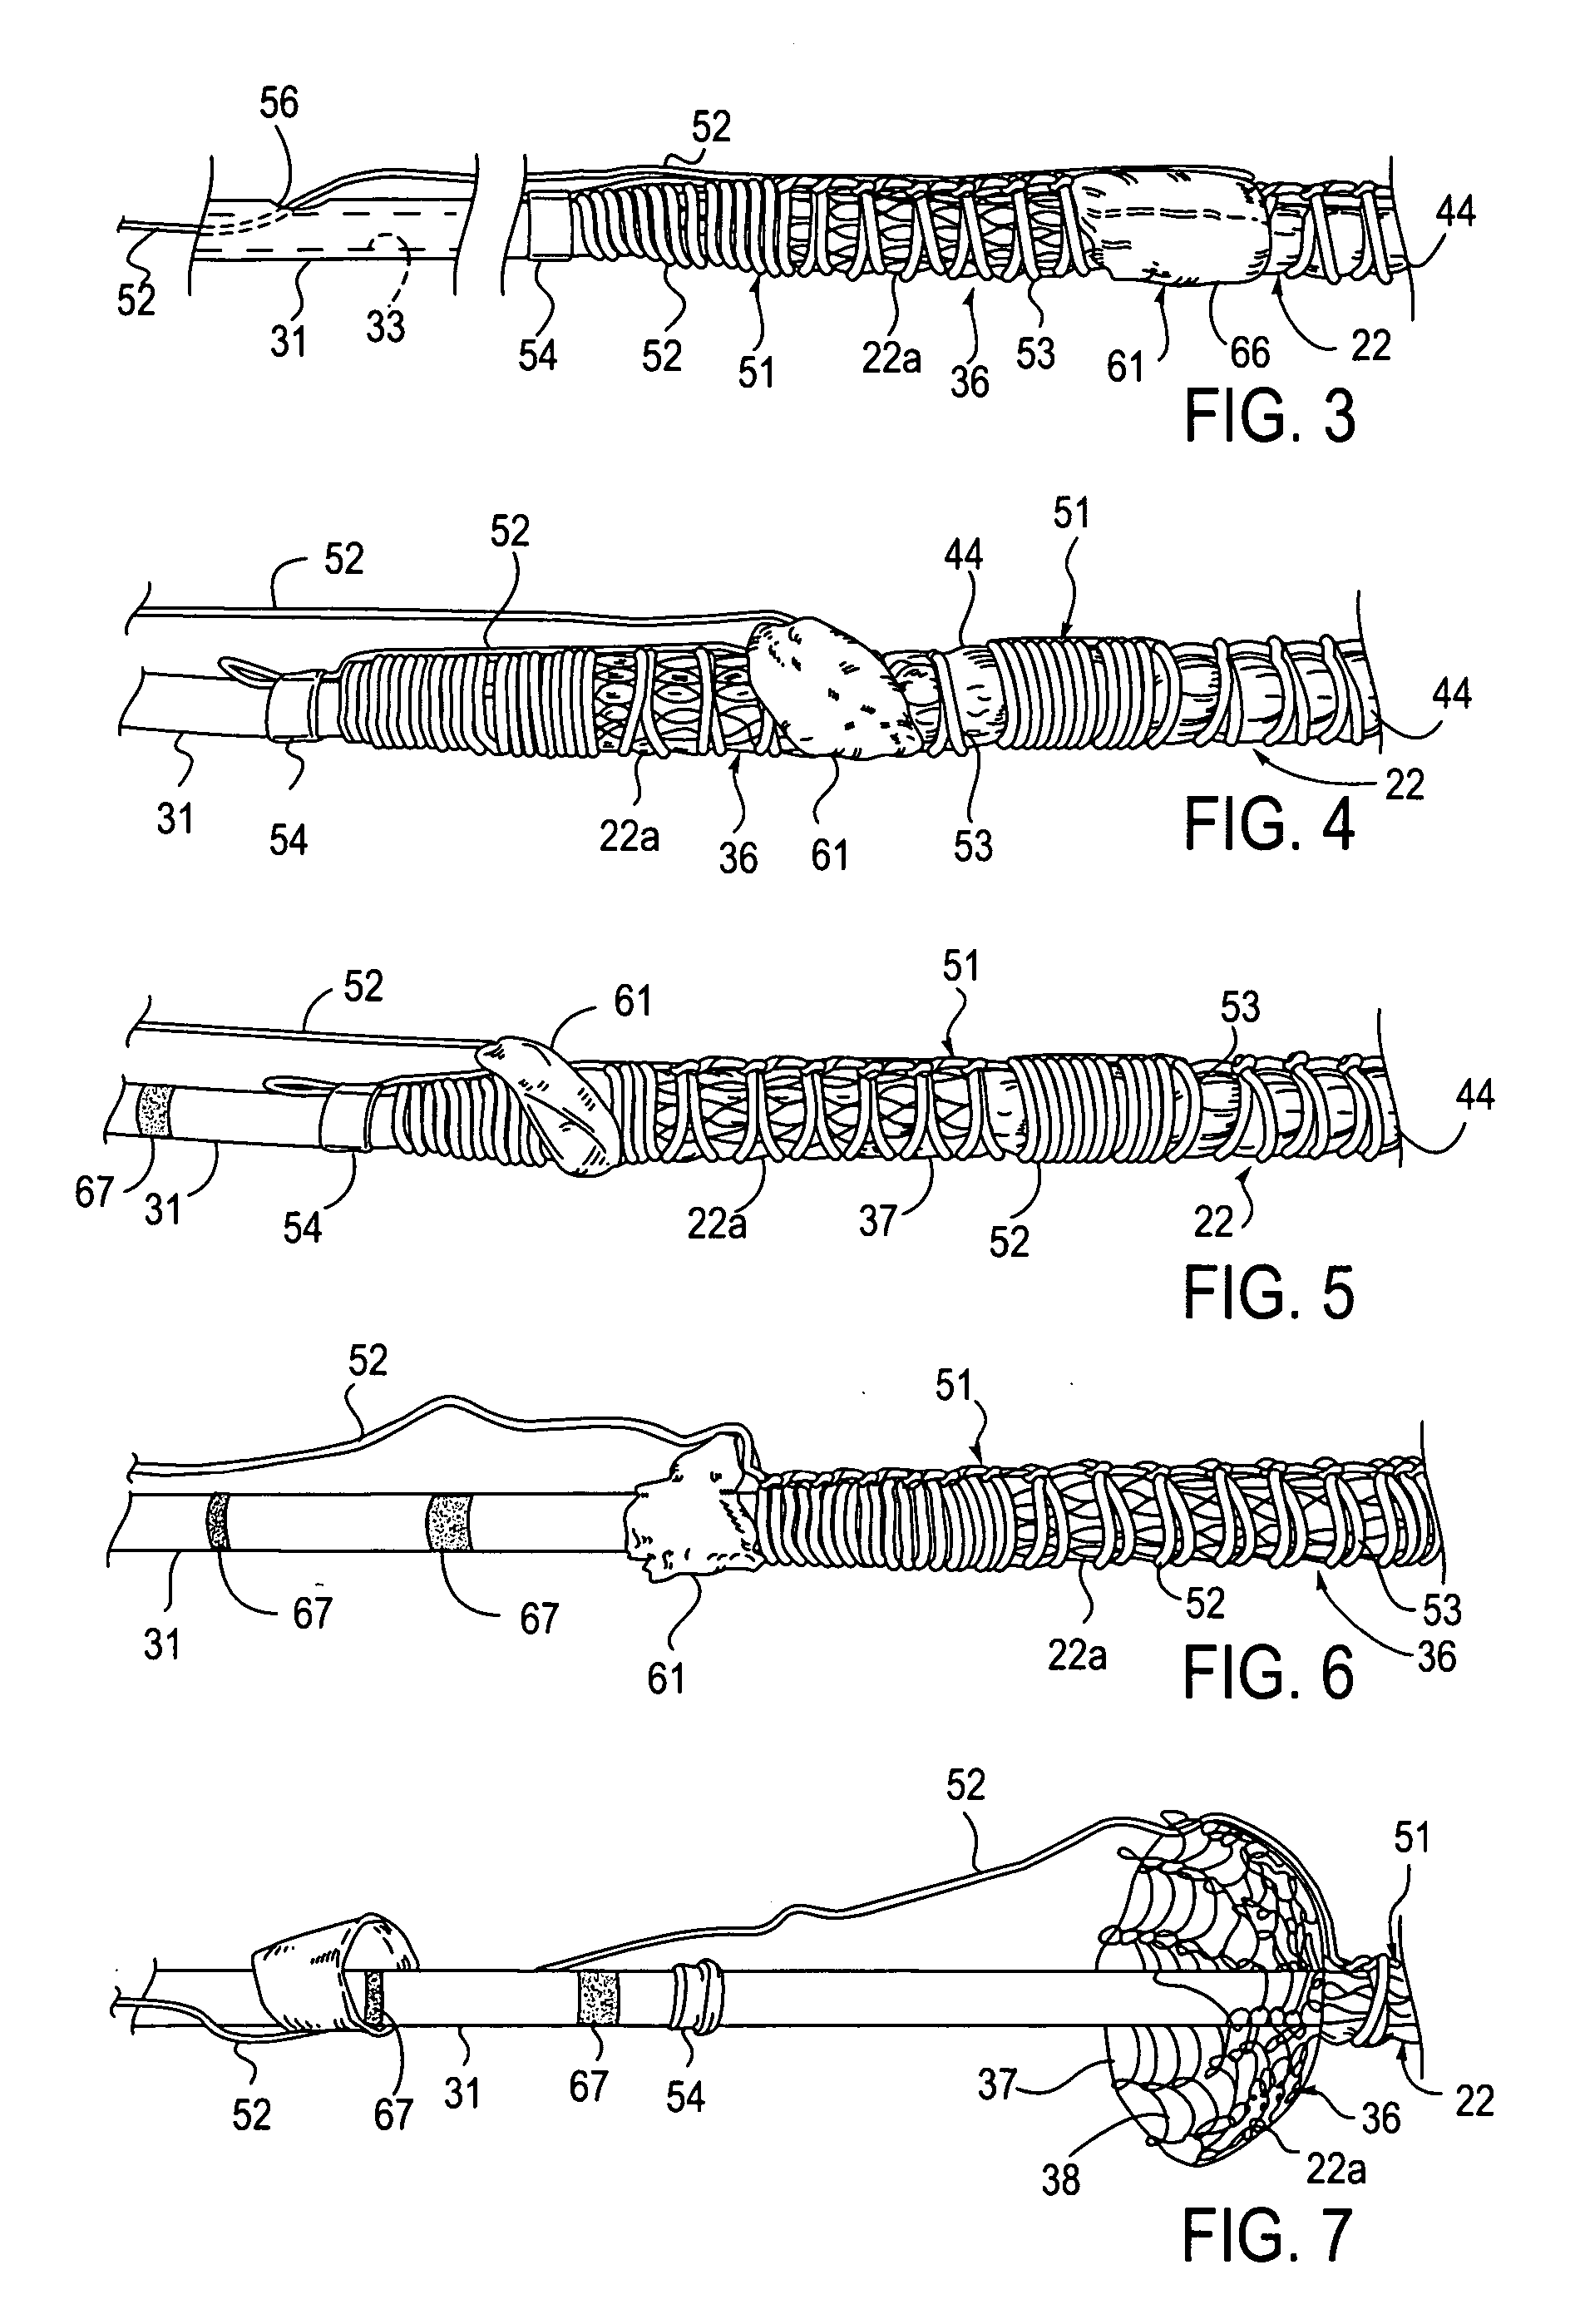 Apparatus with visual marker for guiding deployment of implantable prosthesis